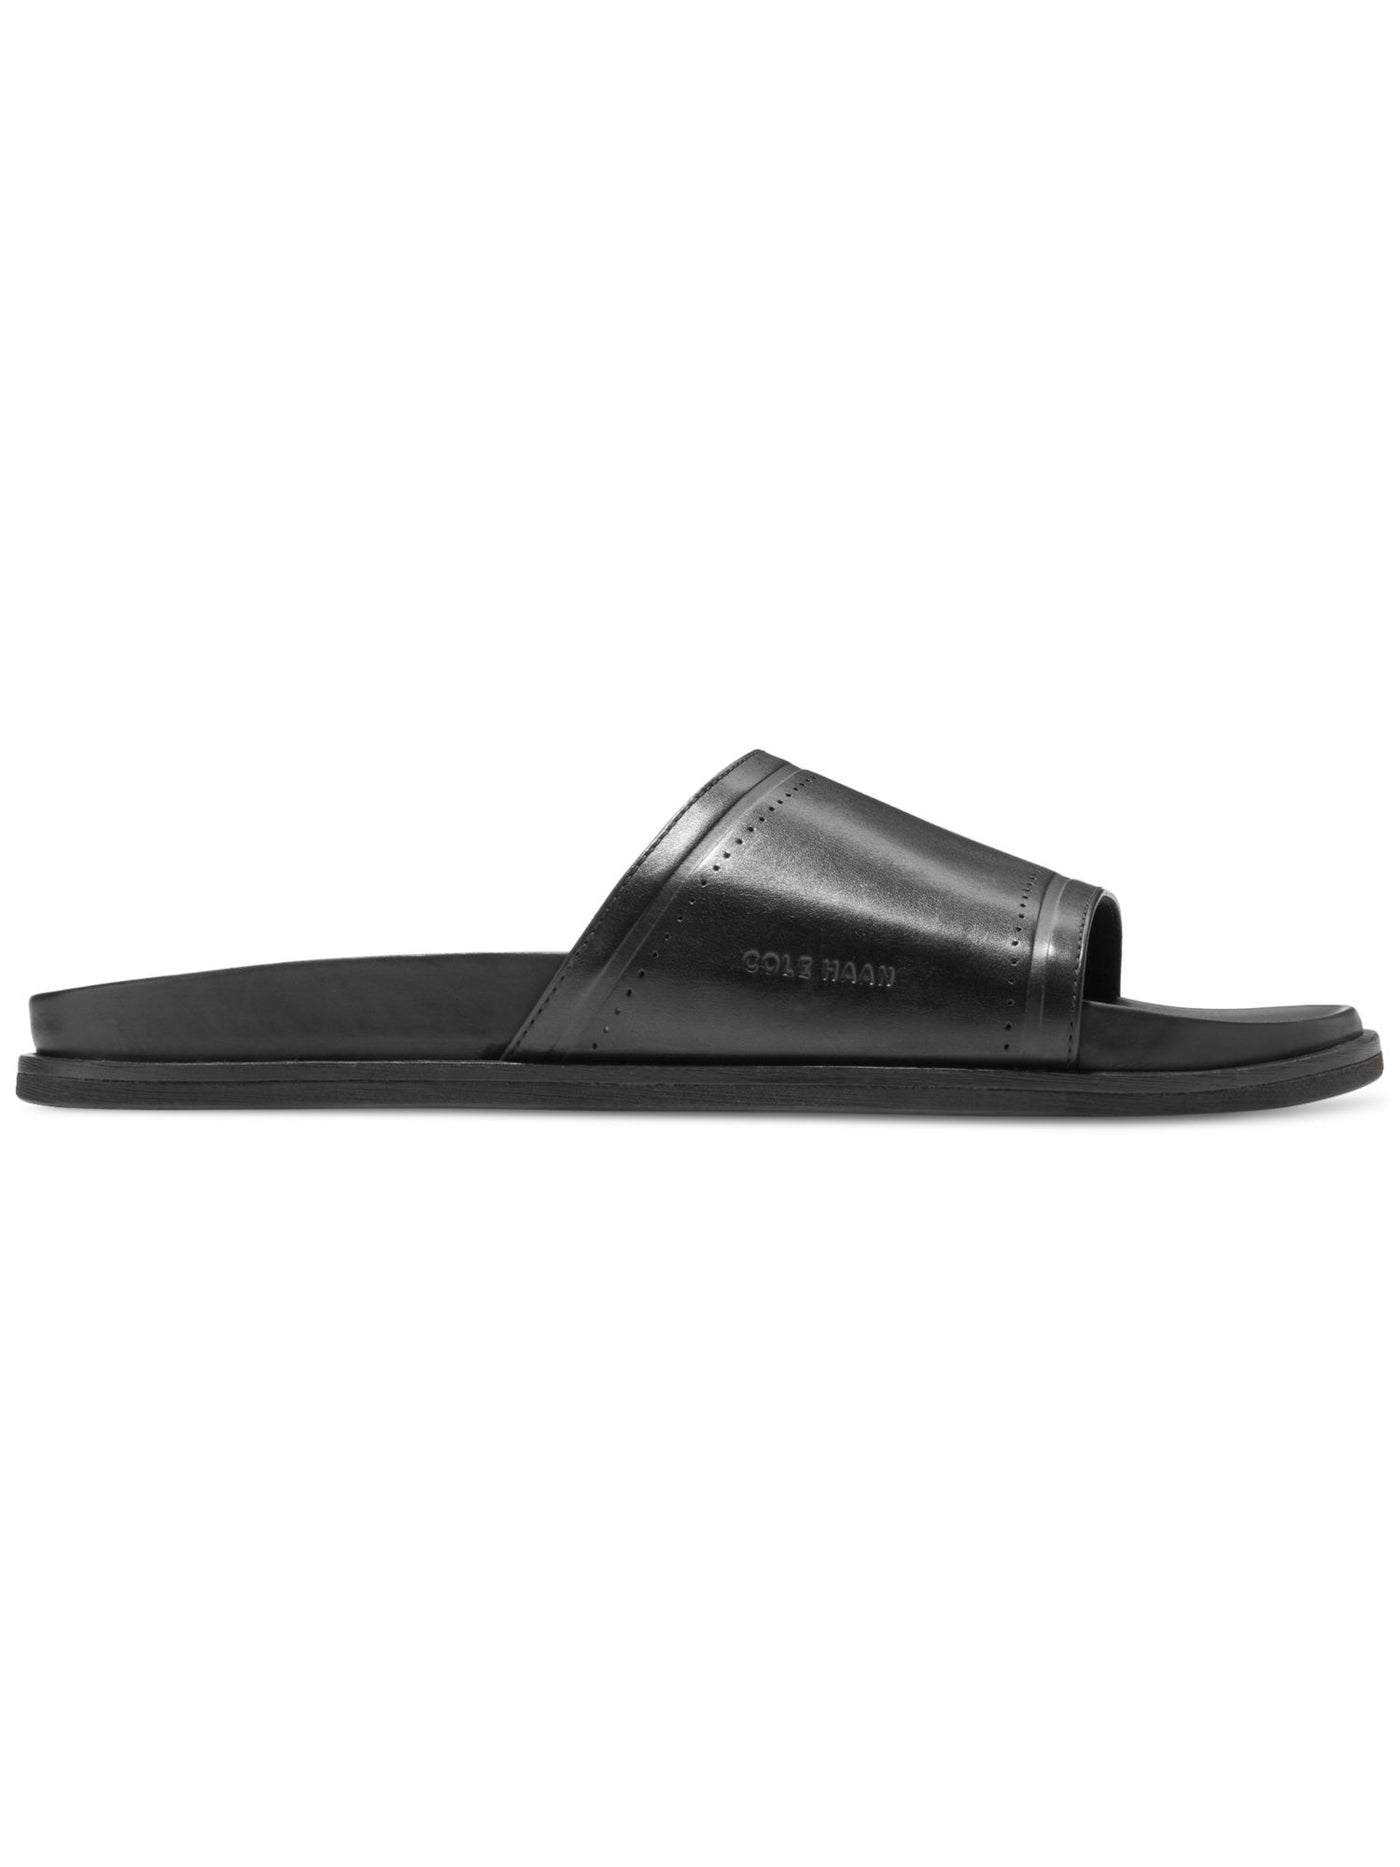 COLE HAAN Mens Black Padded Modern Classics Round Toe Slip On Leather Slide Sandals Shoes 9 M